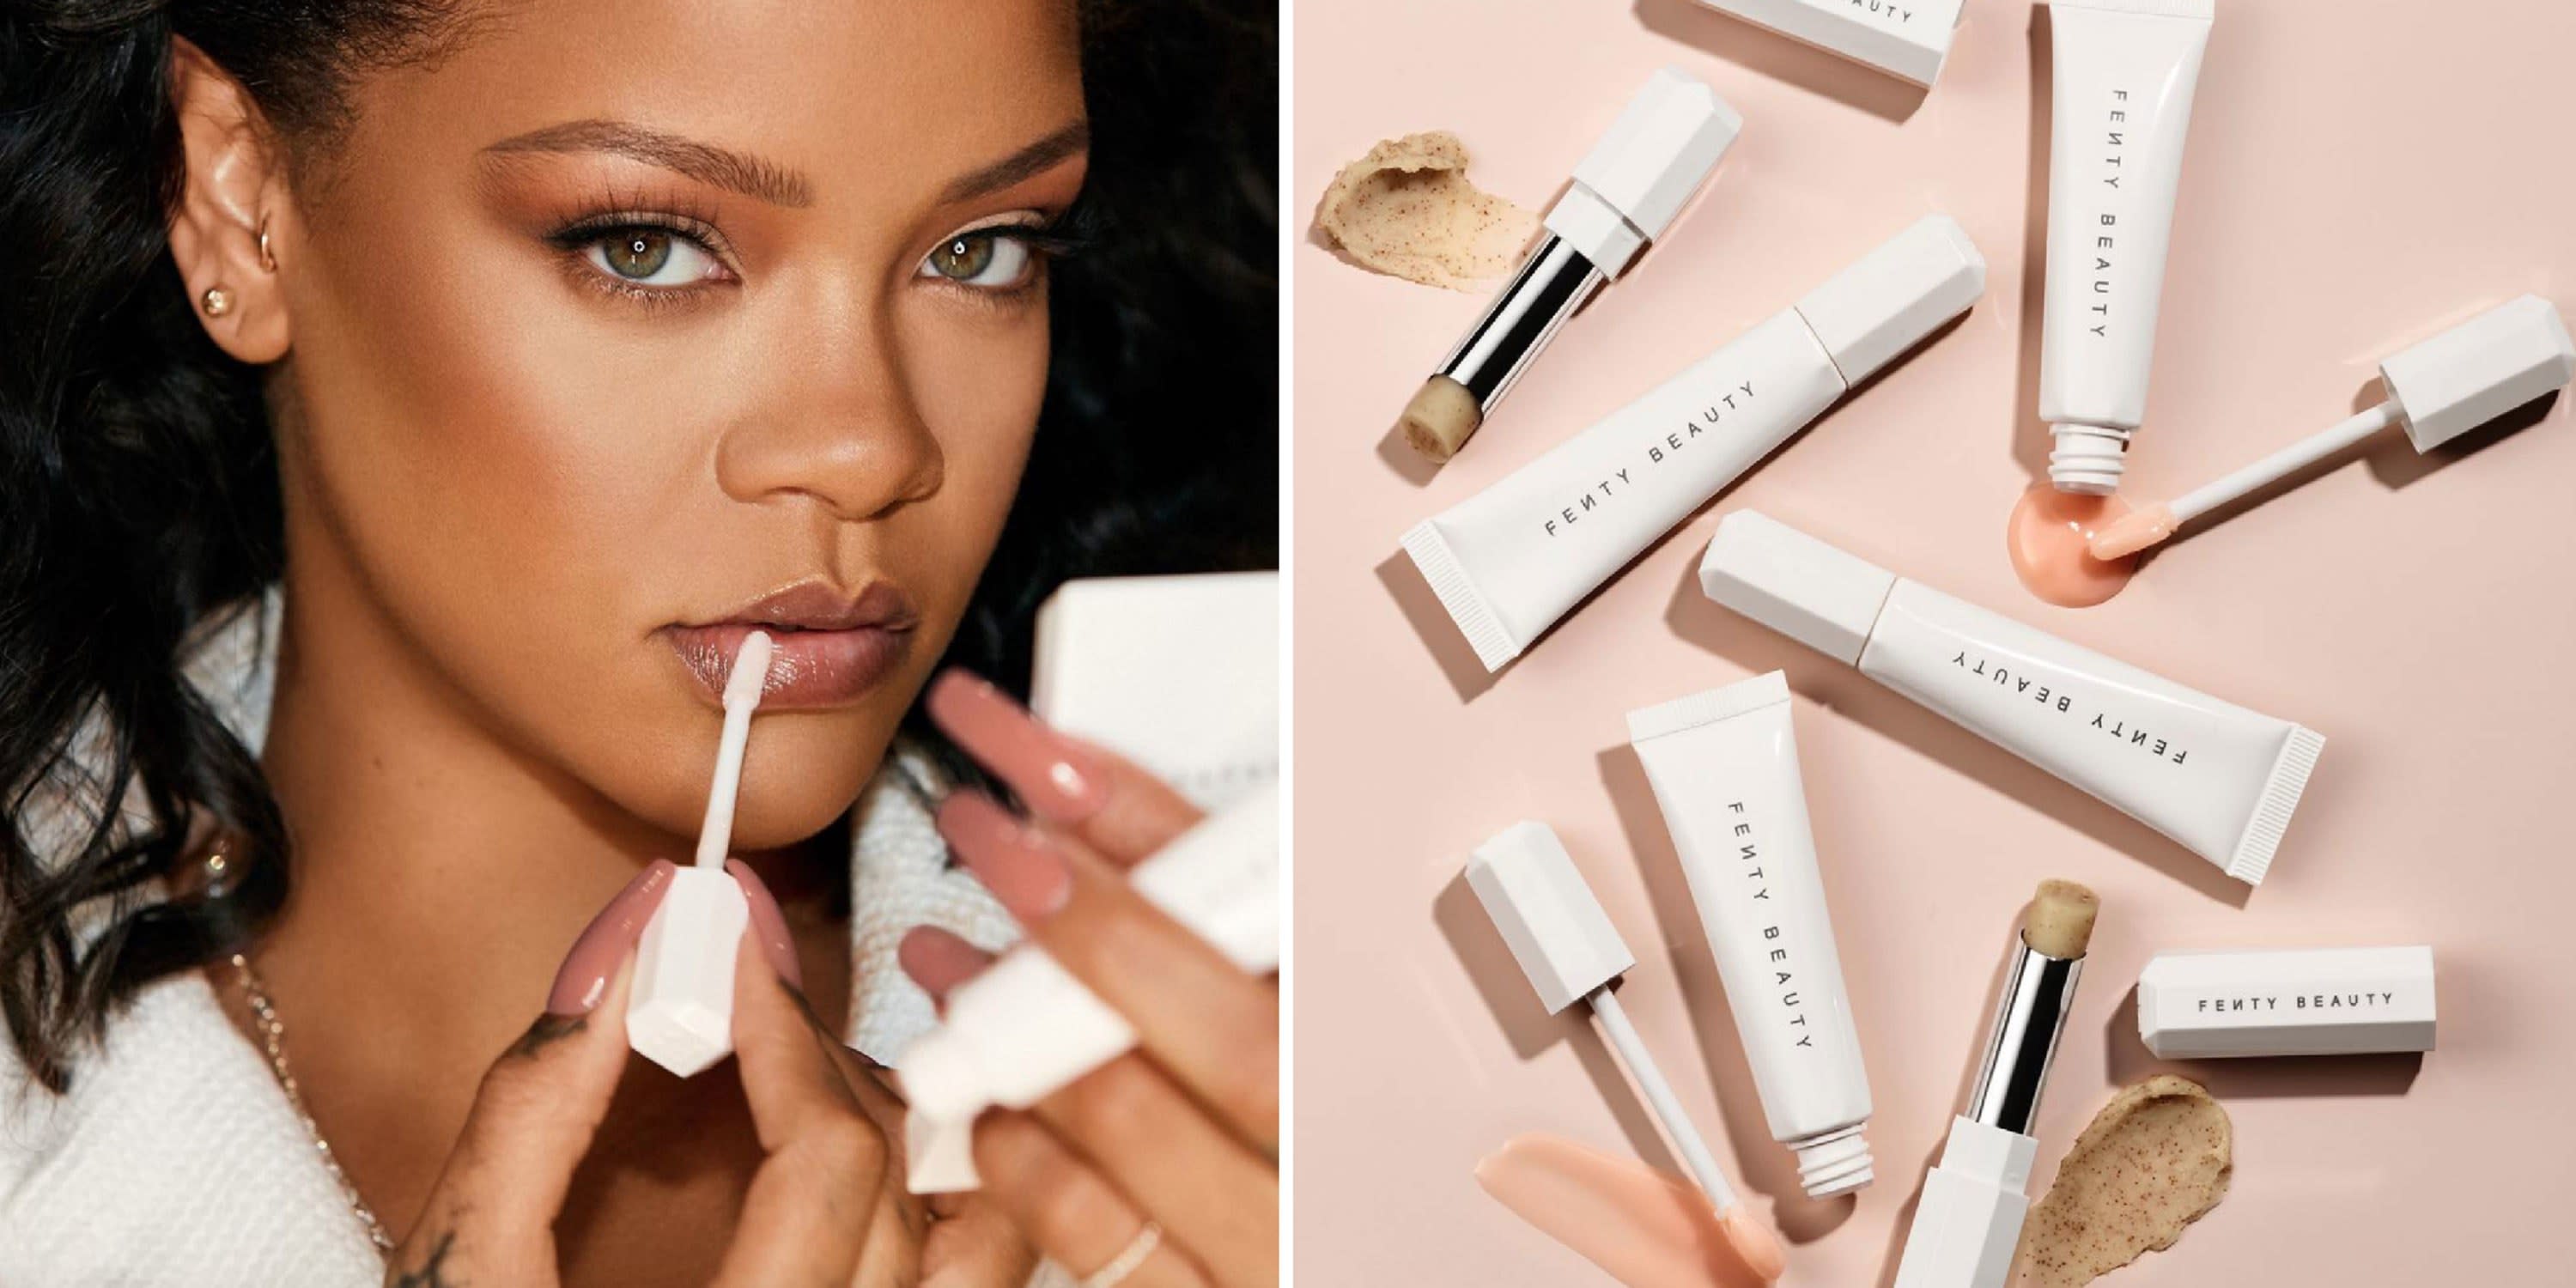 Fenty Beauty Just Revealed Its Dropping Two New LipCare Products